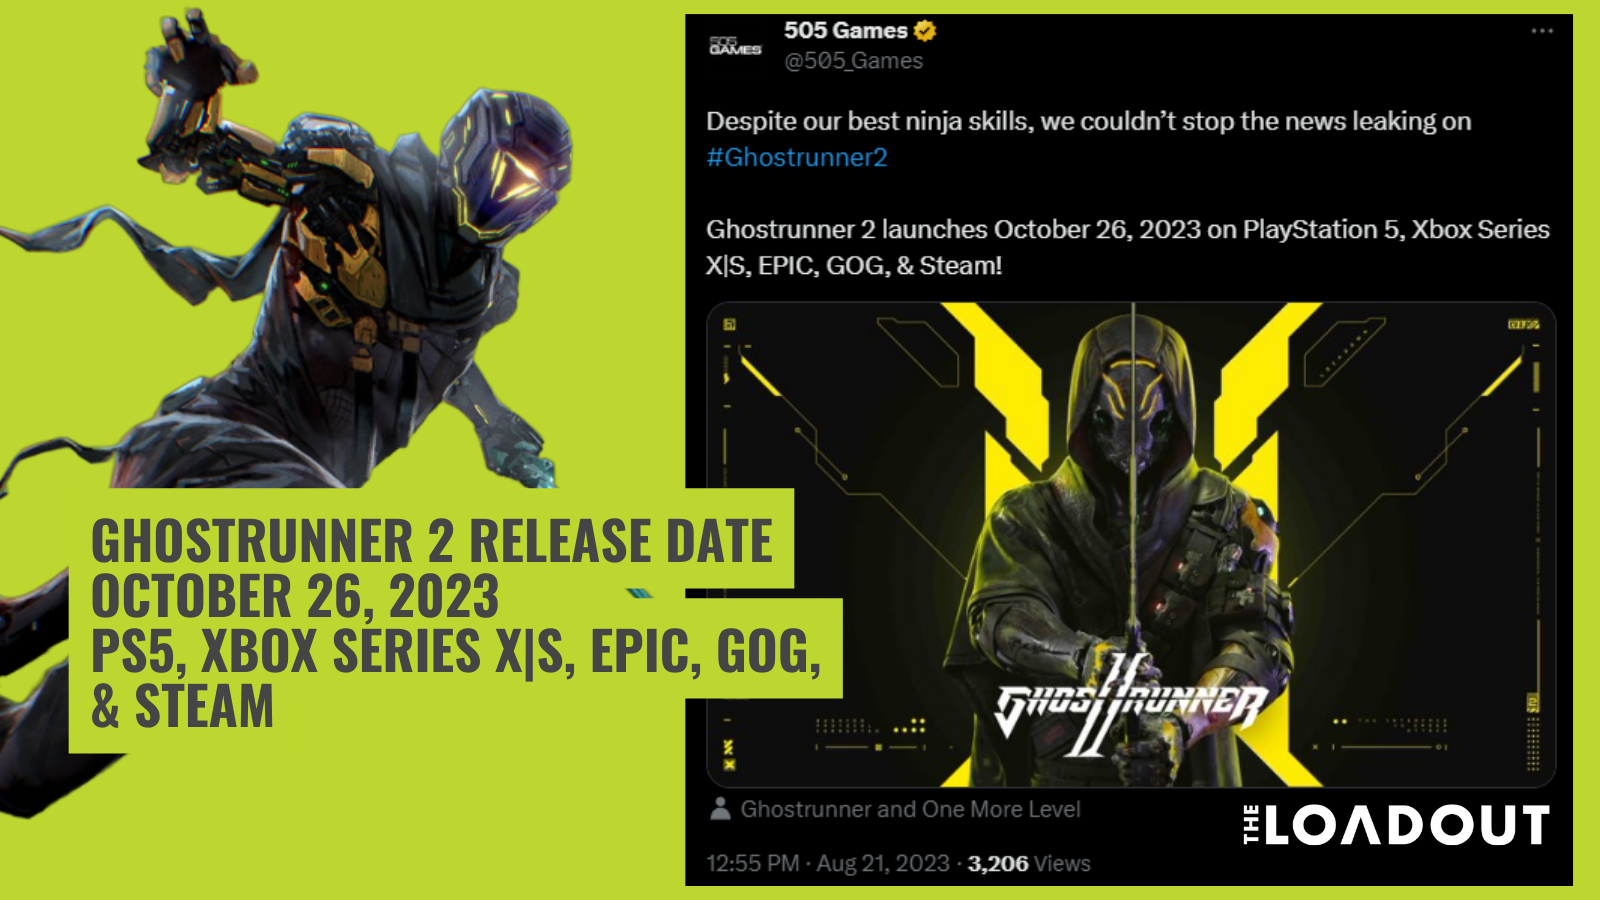 Ghostrunner 2 release date: The tweet announcing the date, and a Ghostrunner can be seen in an image